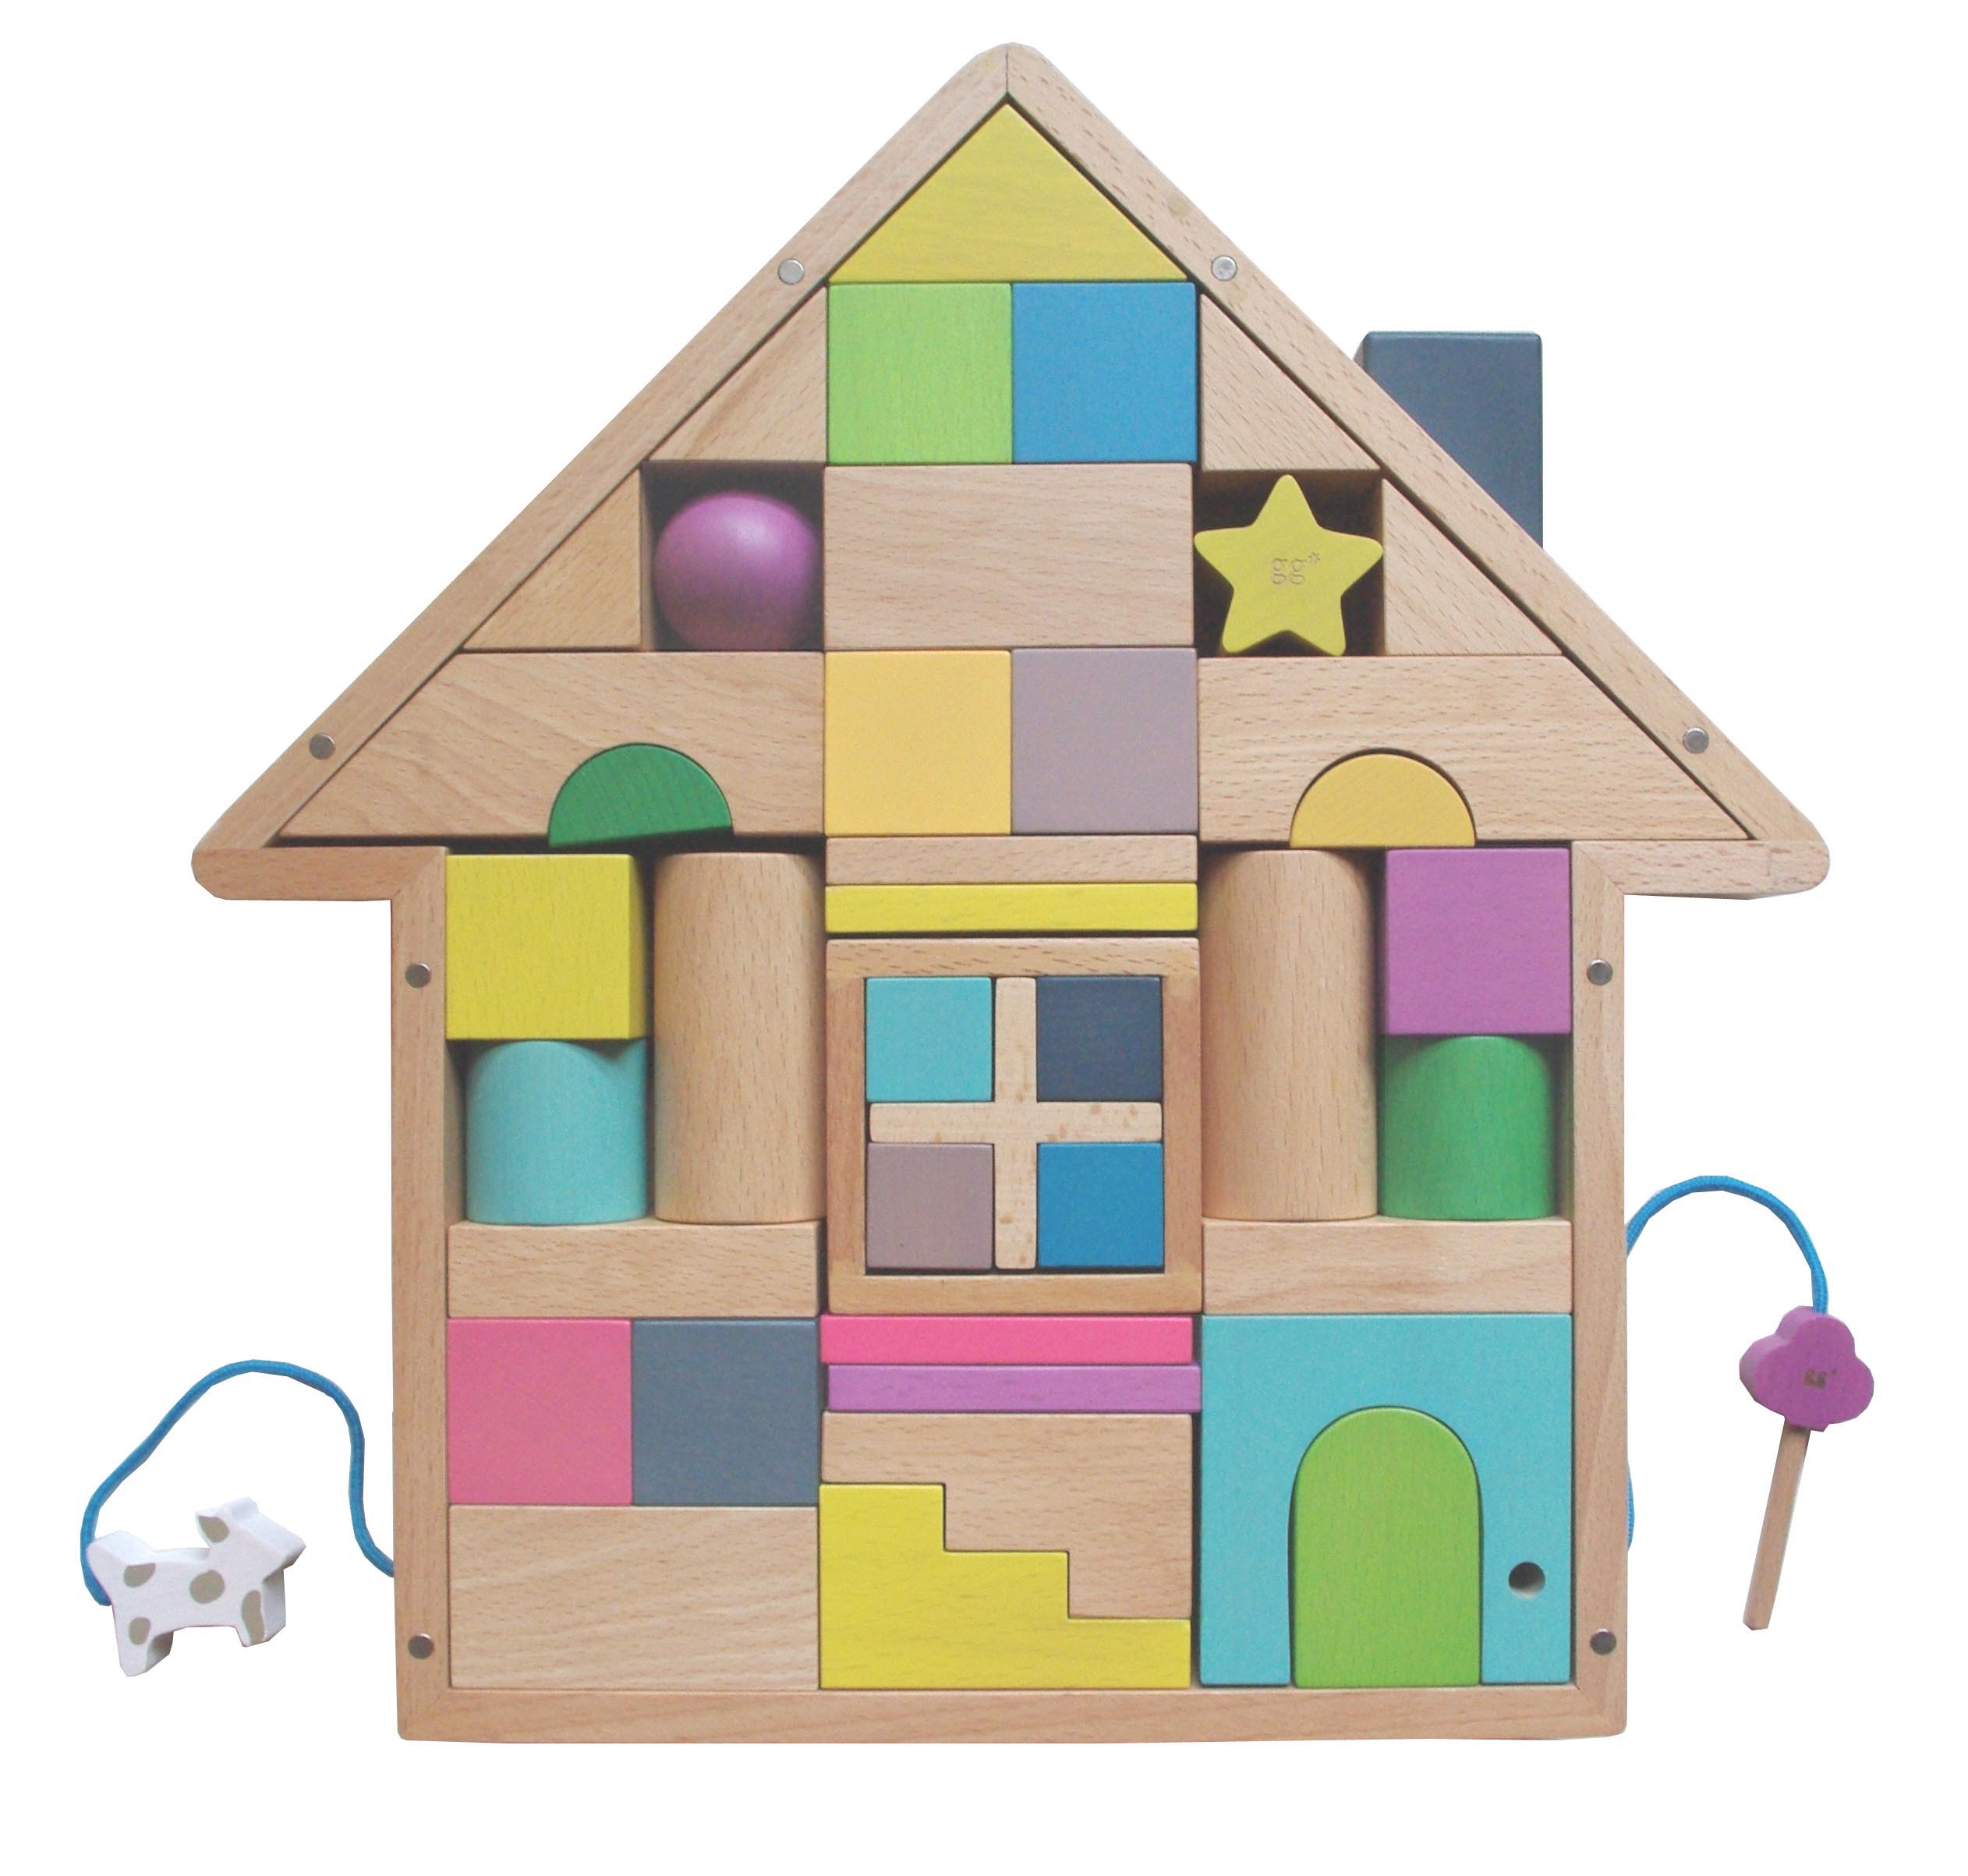 100 Children’s Christmas Gift Ideas: TOP 20 WOODEN TOYS